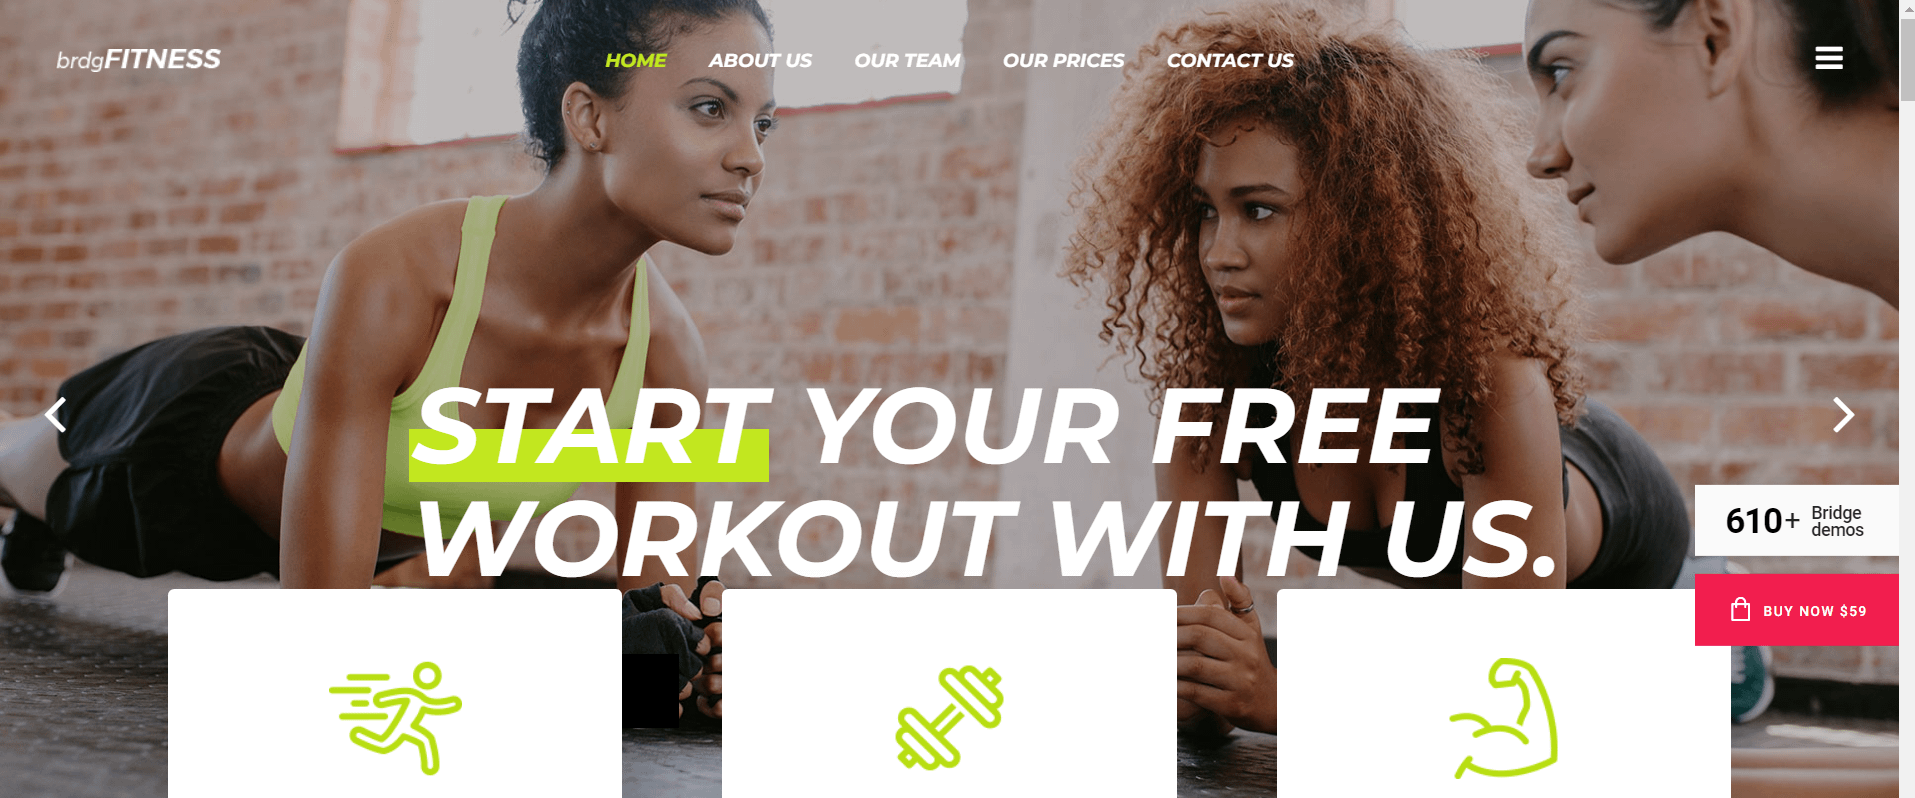 Fitness - One Page WP theme for fitness club